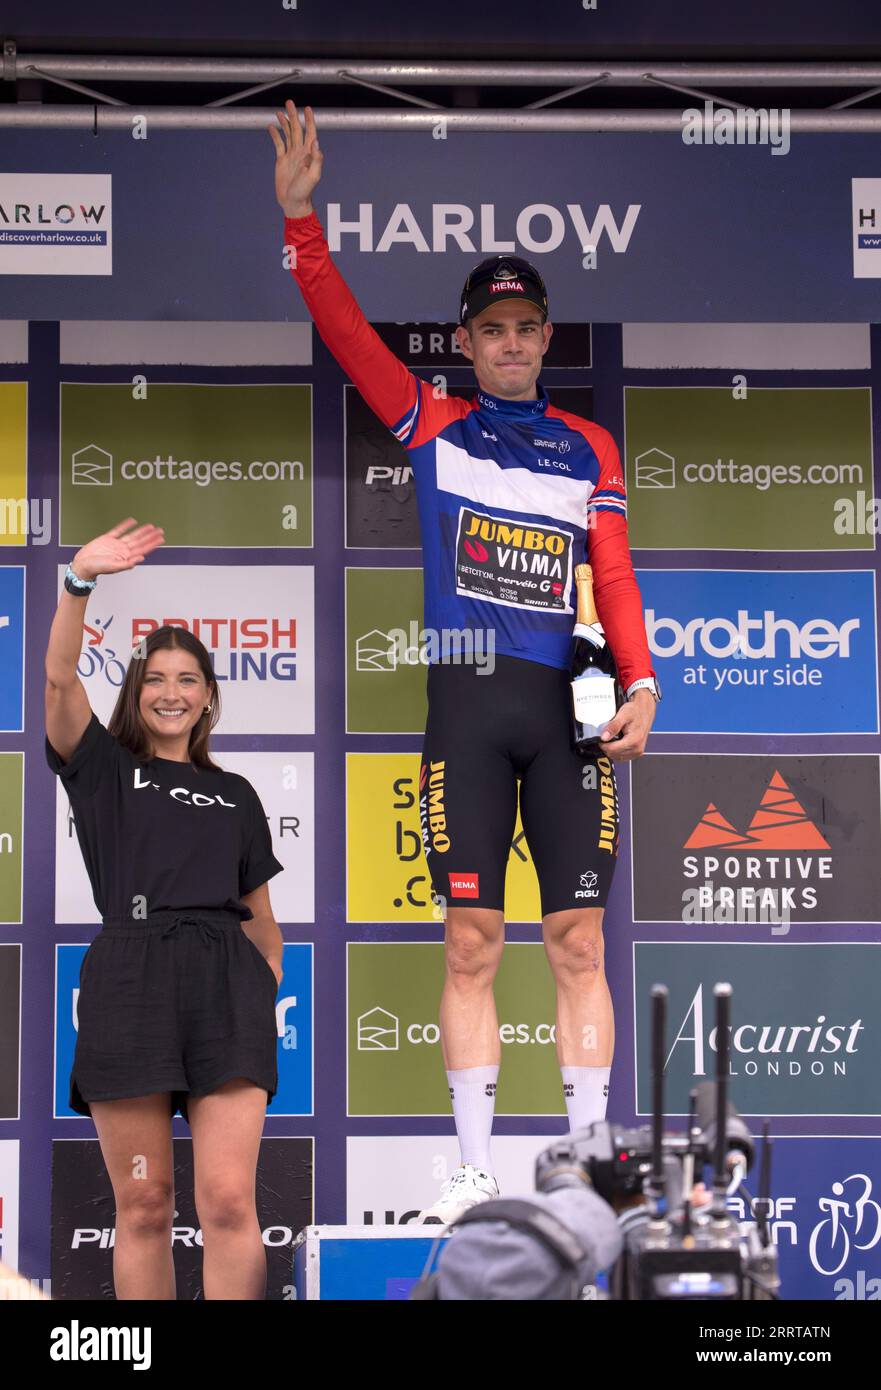 Wout Van Aert General Classification Leader's Jersey auf dem Podium Tour of Britain Cycle Race Stage 6 Harlow Essex Stockfoto